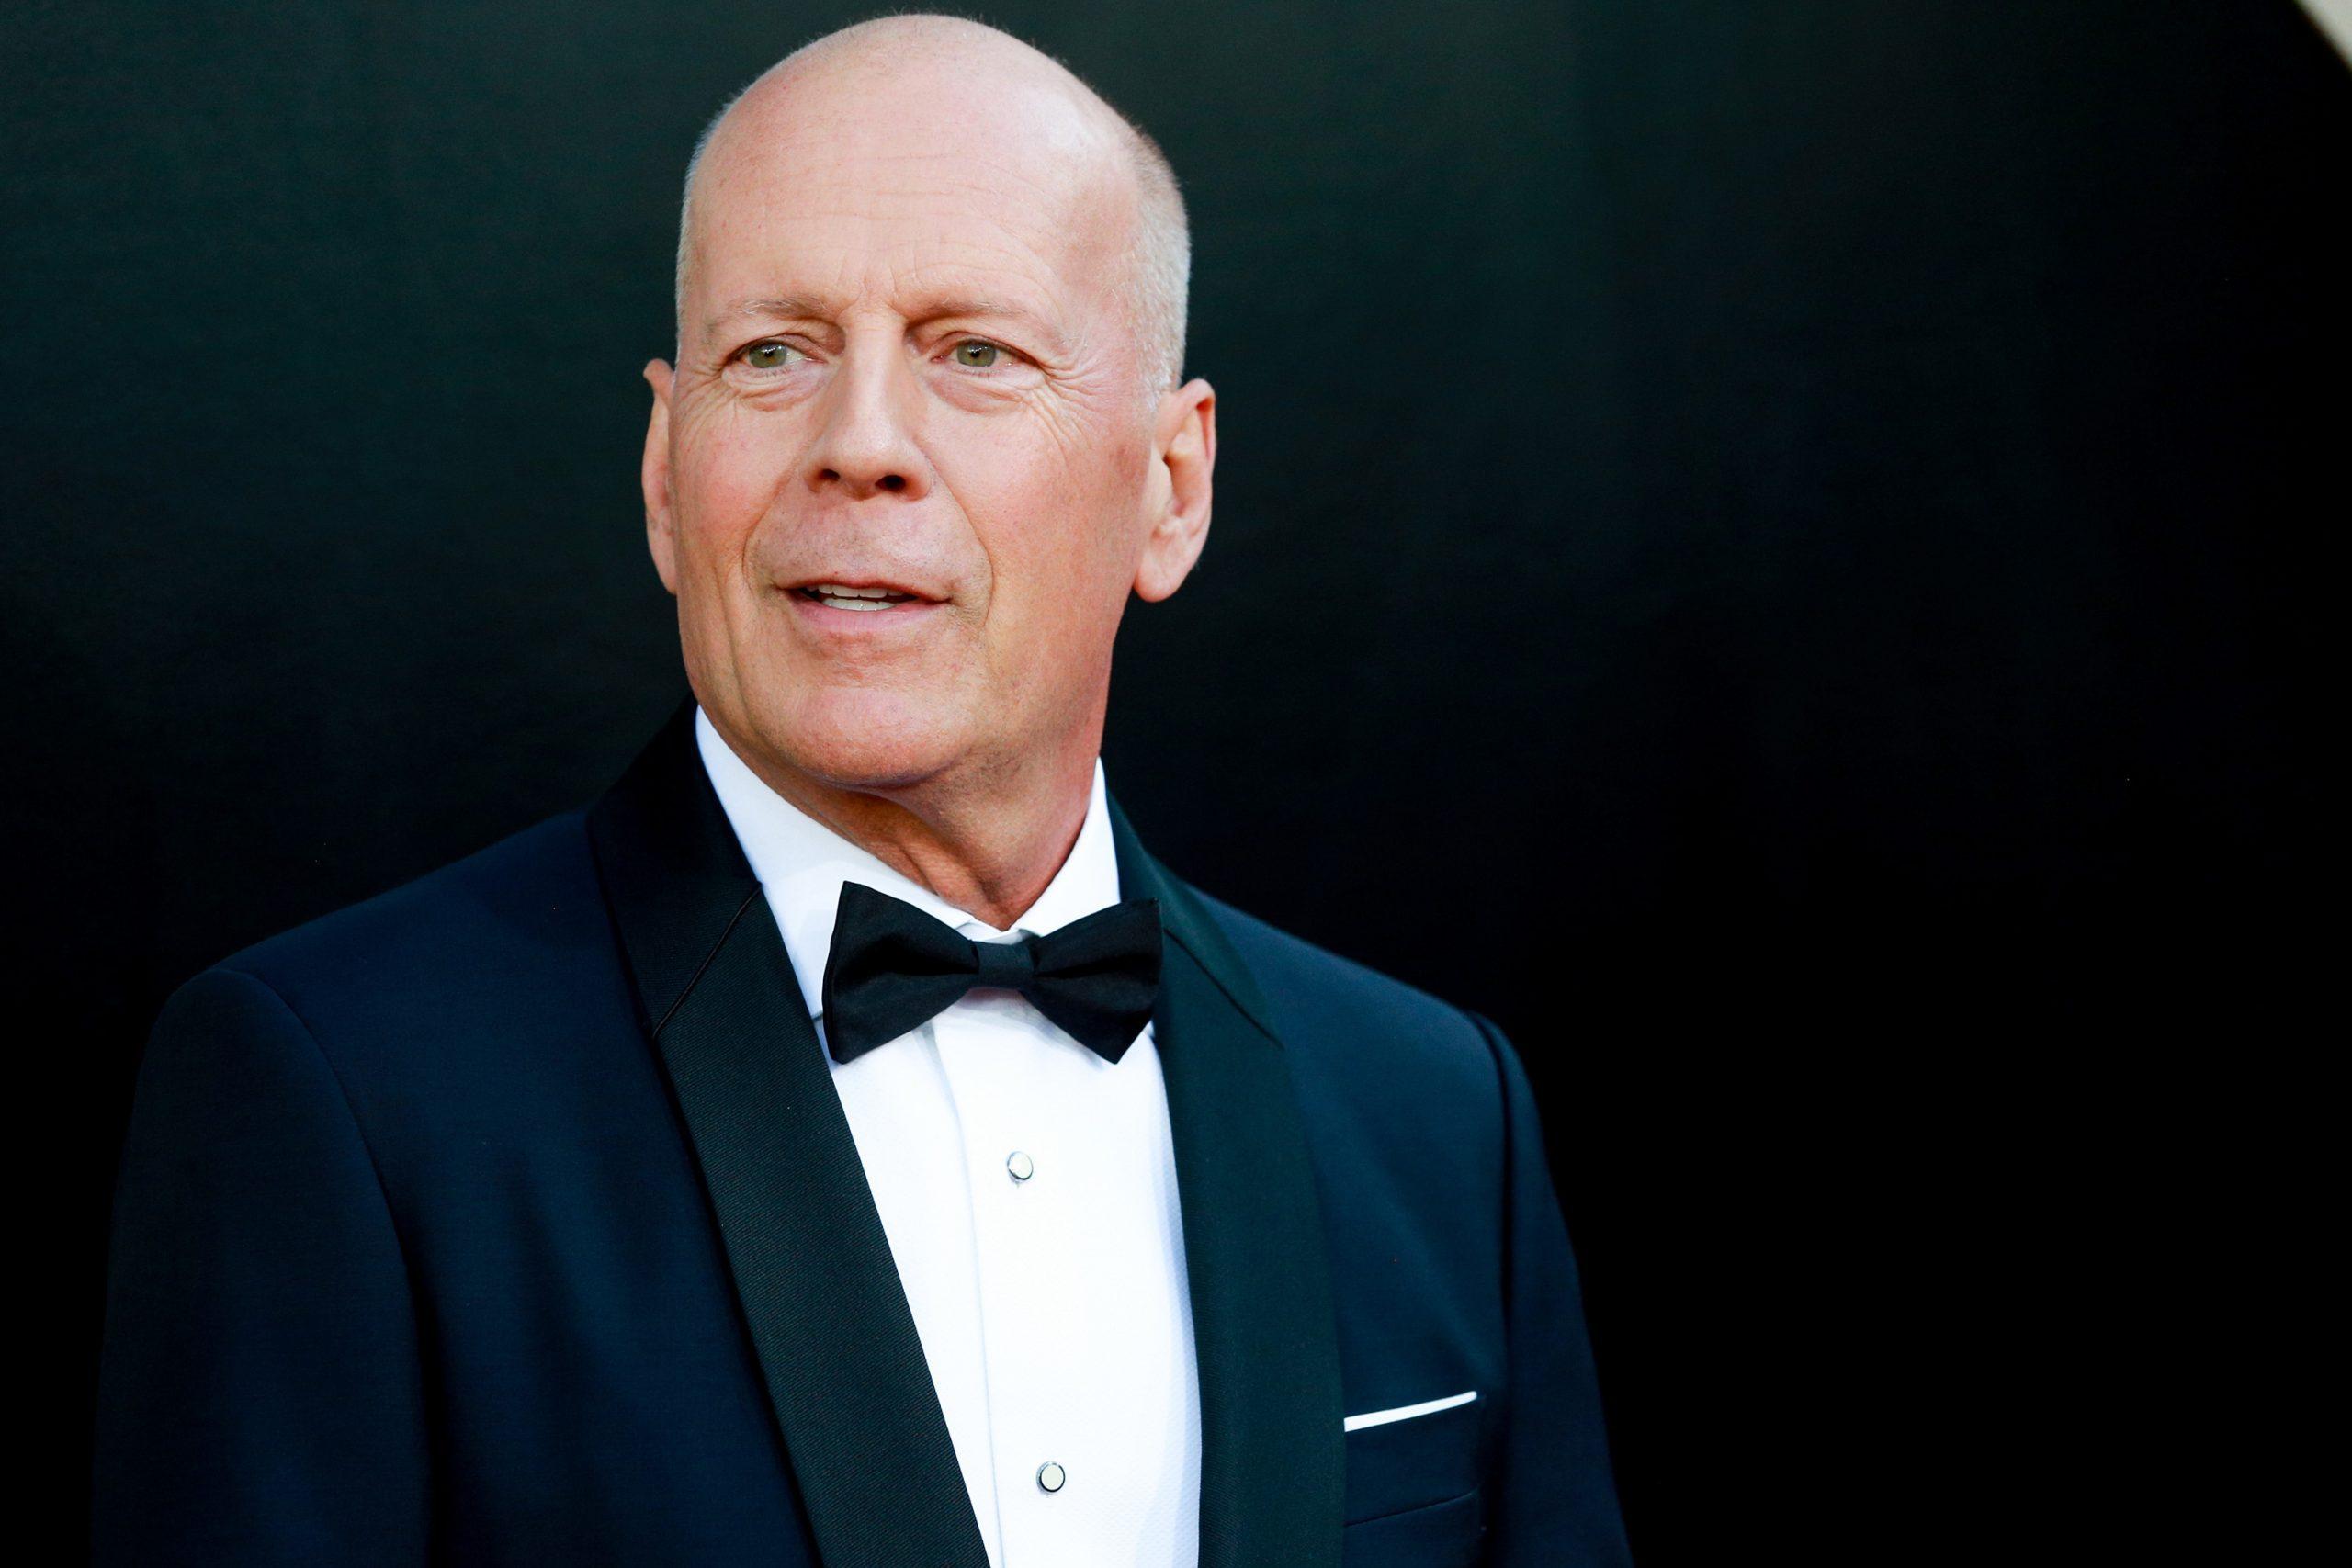 What Is Frontotemporal Dementia? Bruce Willis' Condition, Explained.